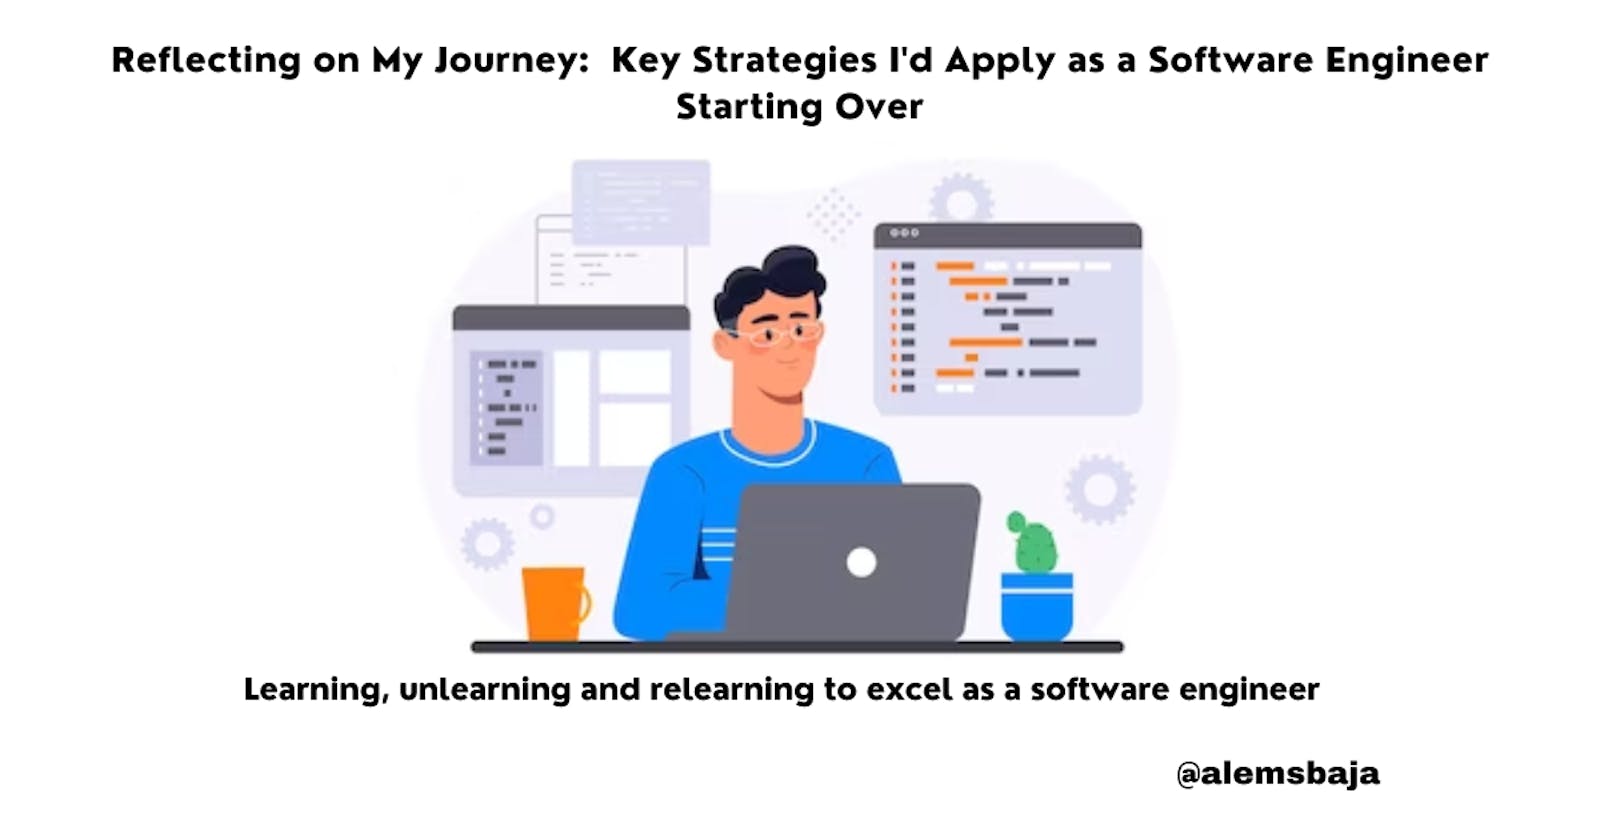 Reflecting on my Journey: Key Strategies I'd Apply as a Software Engineer Starting Over